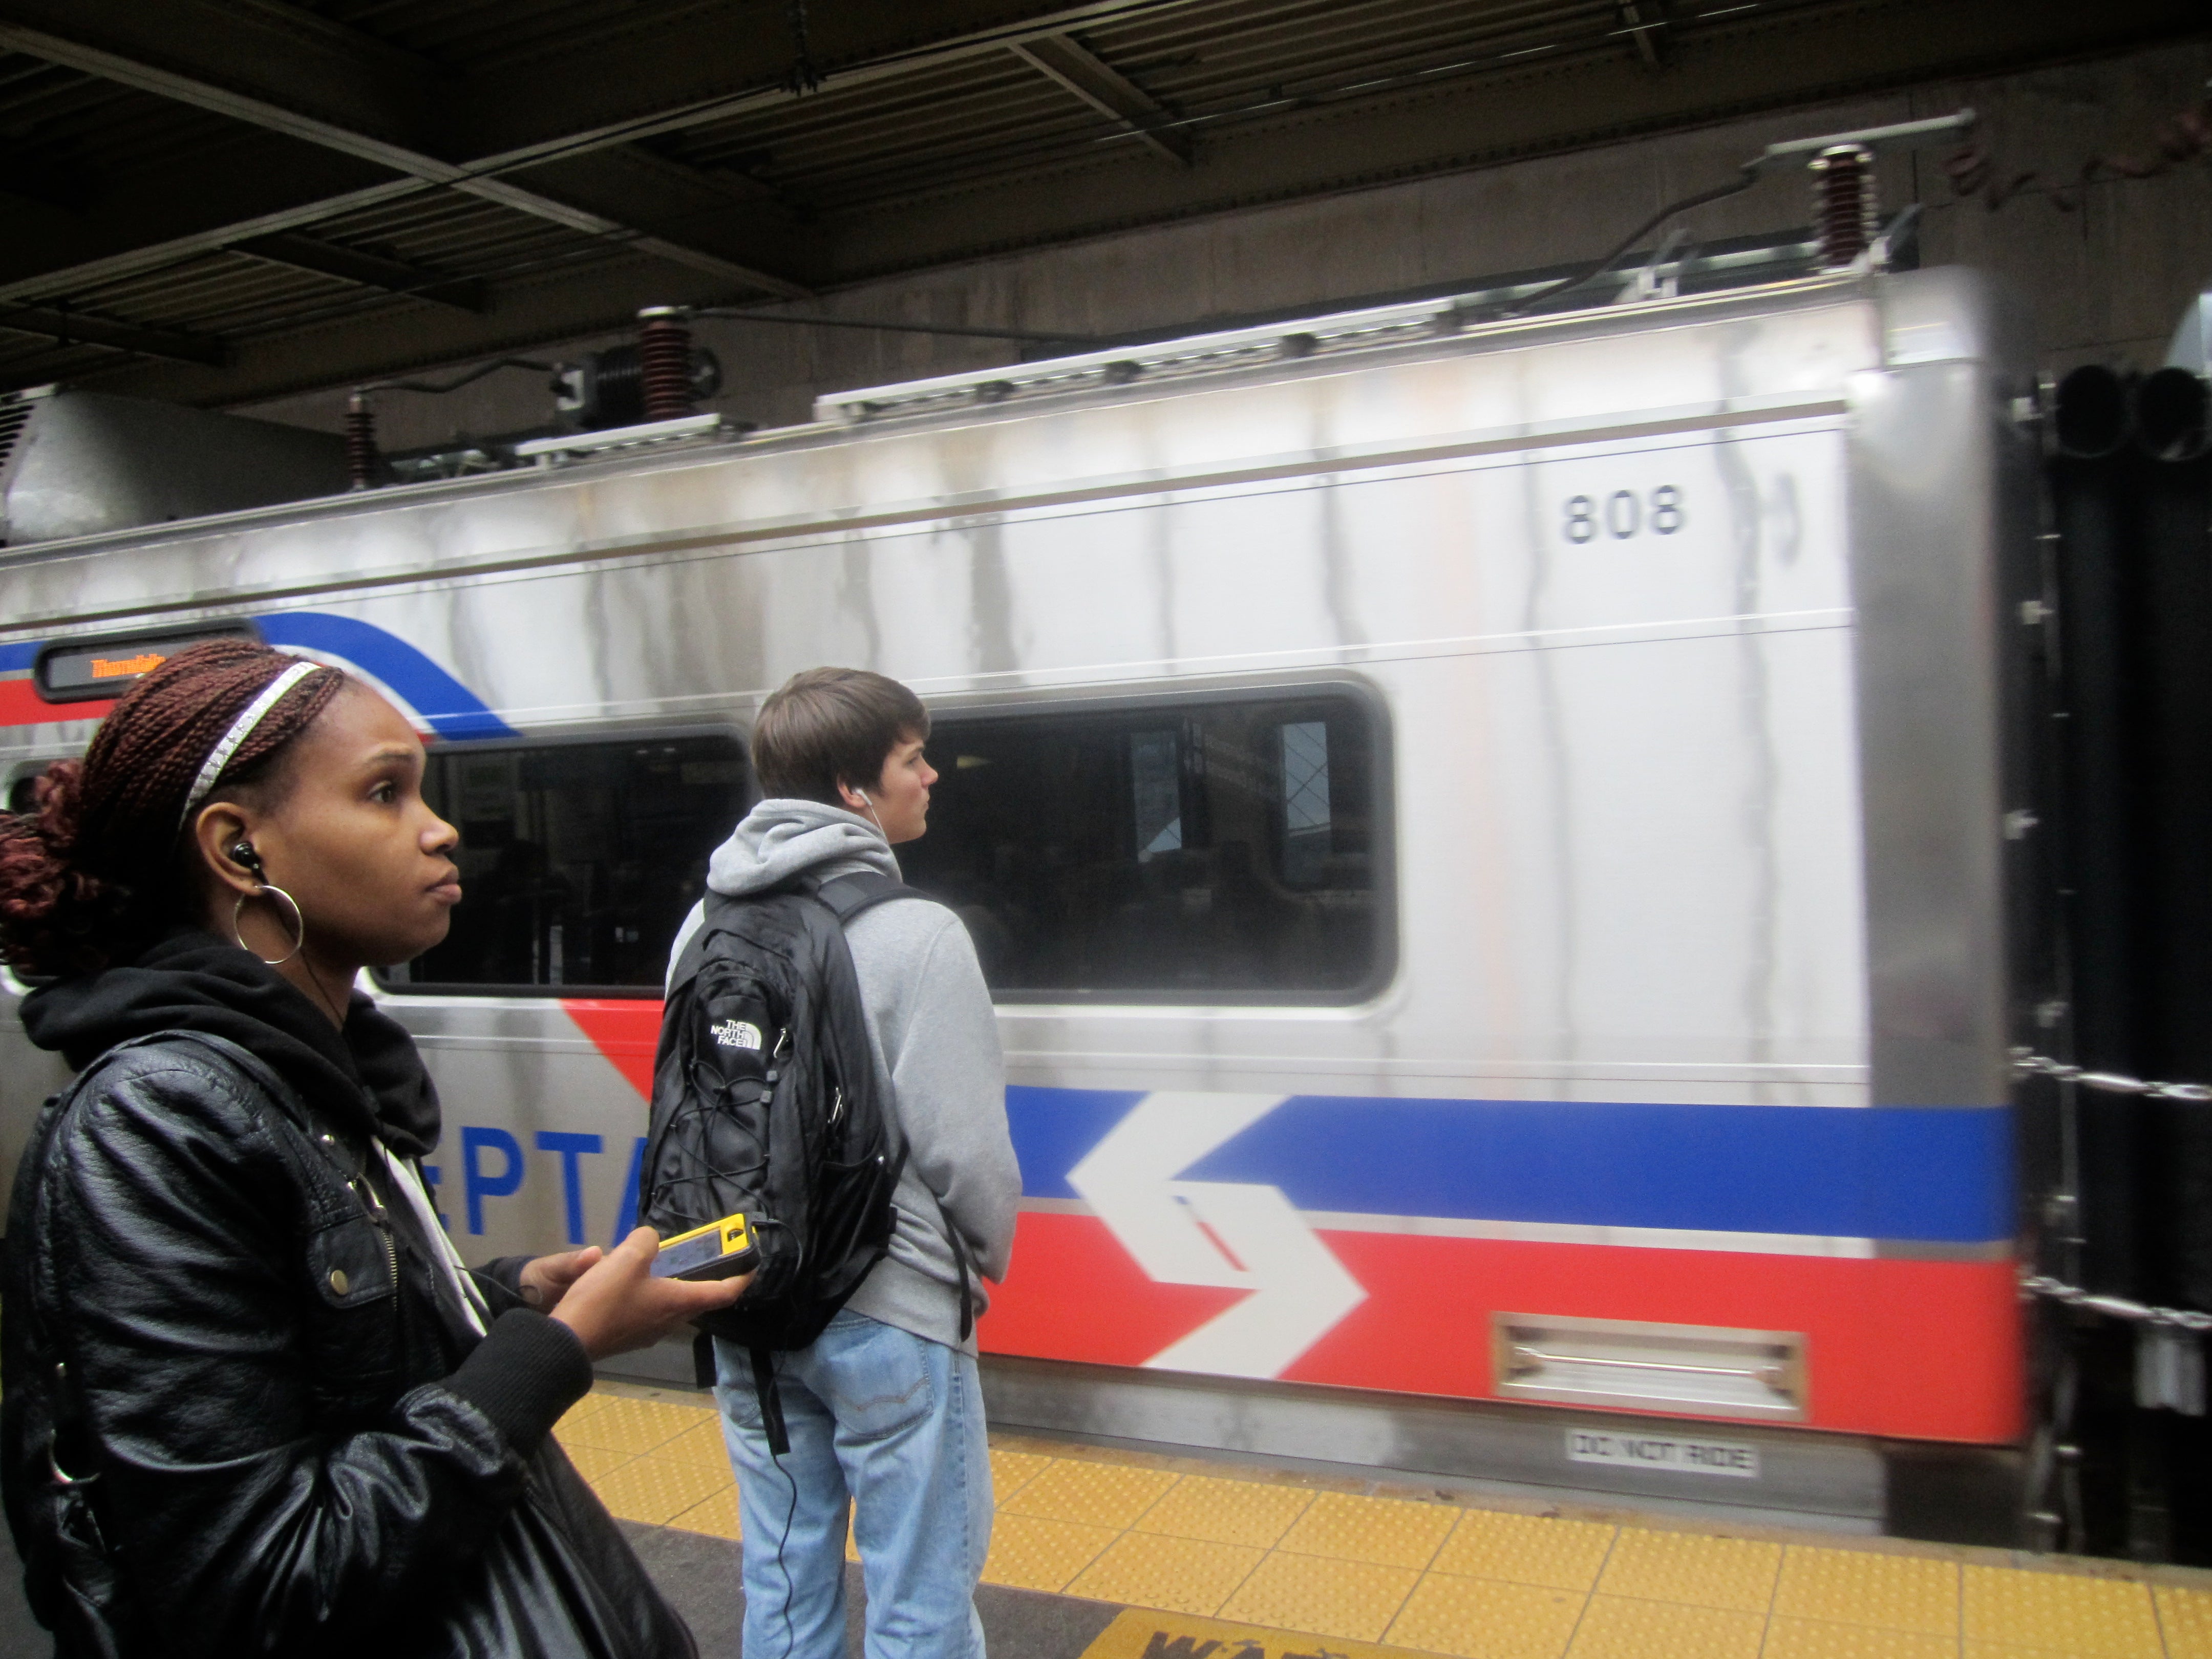 SEPTA and DVARP are working to crowd source Silverliner V rider feedback